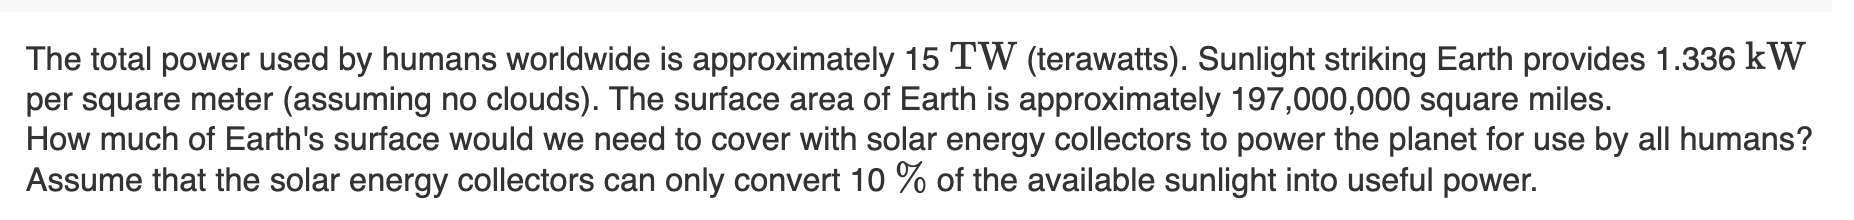 The total power used by humans worldwide is approximately 15 TW (terawatts). Sunlight striking Earth provides 1.336 kW
per square meter (assuming no clouds). The surface area of Earth is approximately 197,000,000 square miles.
How much of Earth's surface would we need to cover with solar energy collectors to power the planet for use by all humans?
Assume that the solar energy collectors can only convert 10 % of the available sunlight into useful power.
